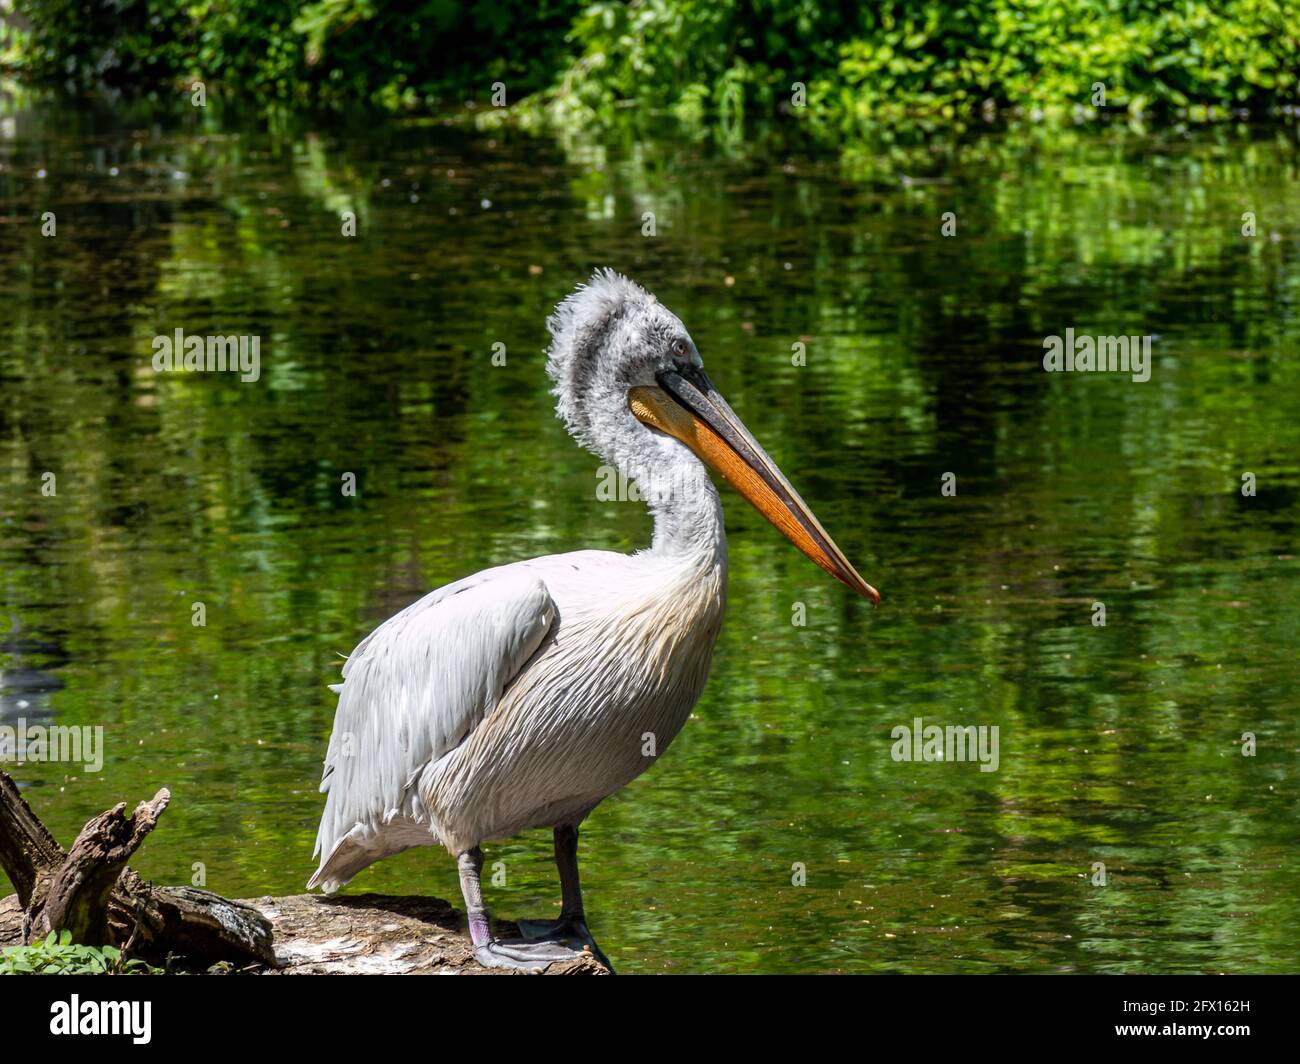 Dalmatian pelican by a pond Stock Photo